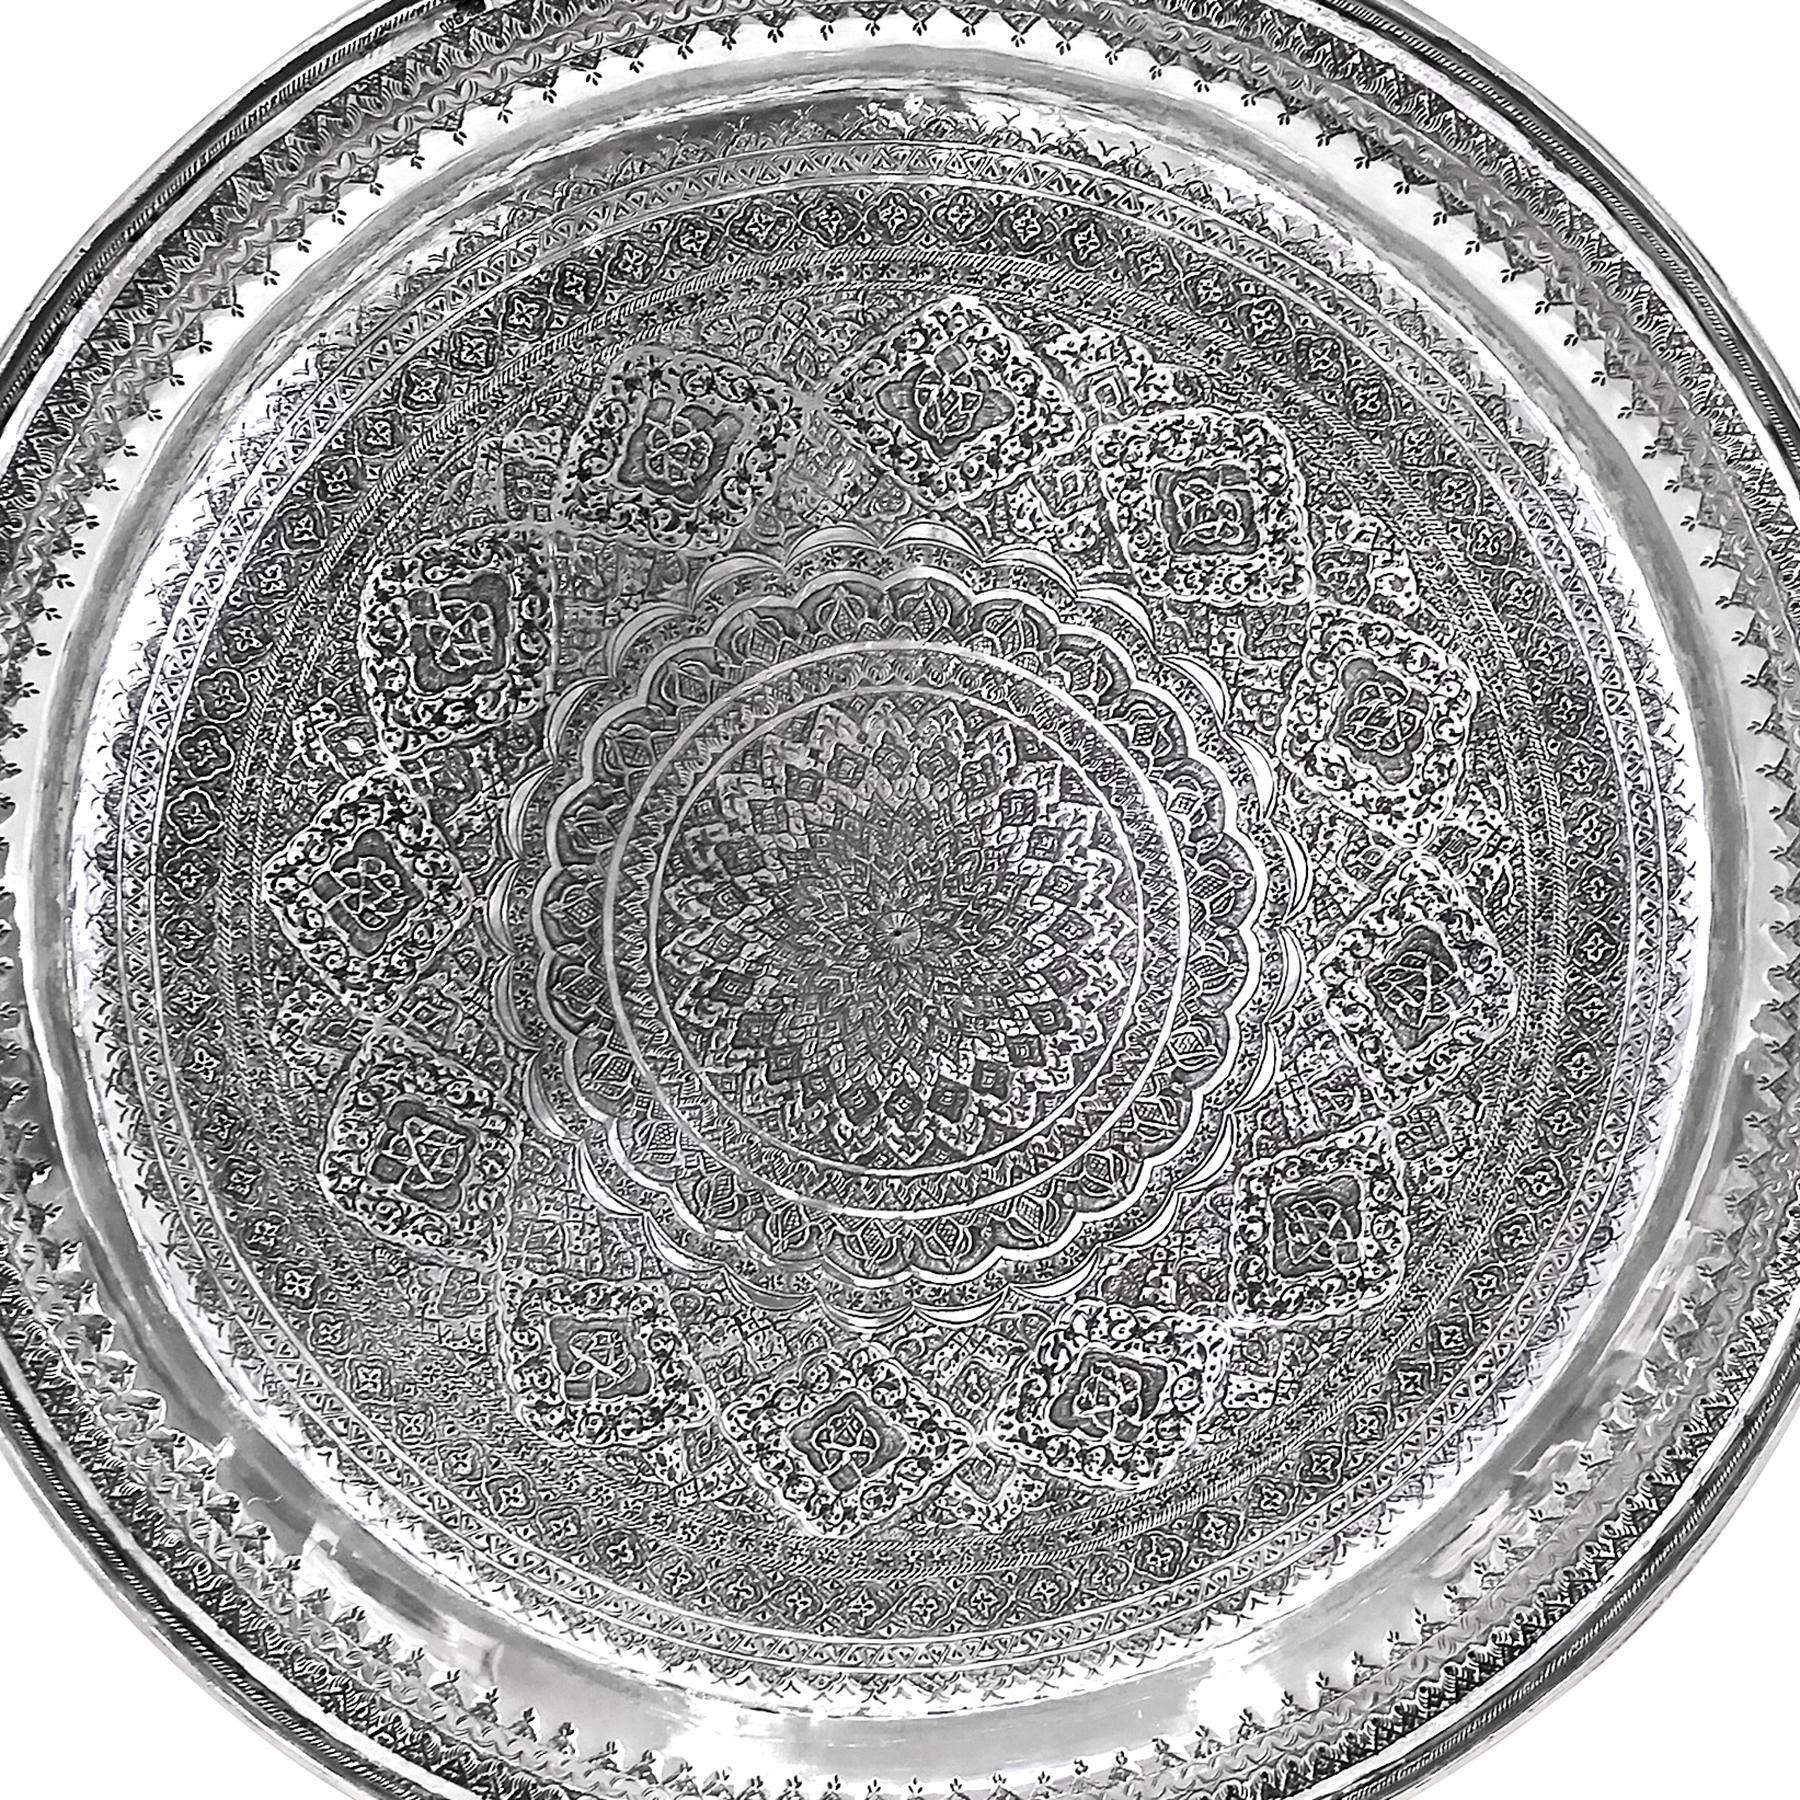 Extremely gorgeous and unique piece of art.
Old round silver tray. 
.900 proof silver. Very detailed and delicate hand carved. 
Designer: josdani
Weight: 1564 grams
Diameter= 16 inches
